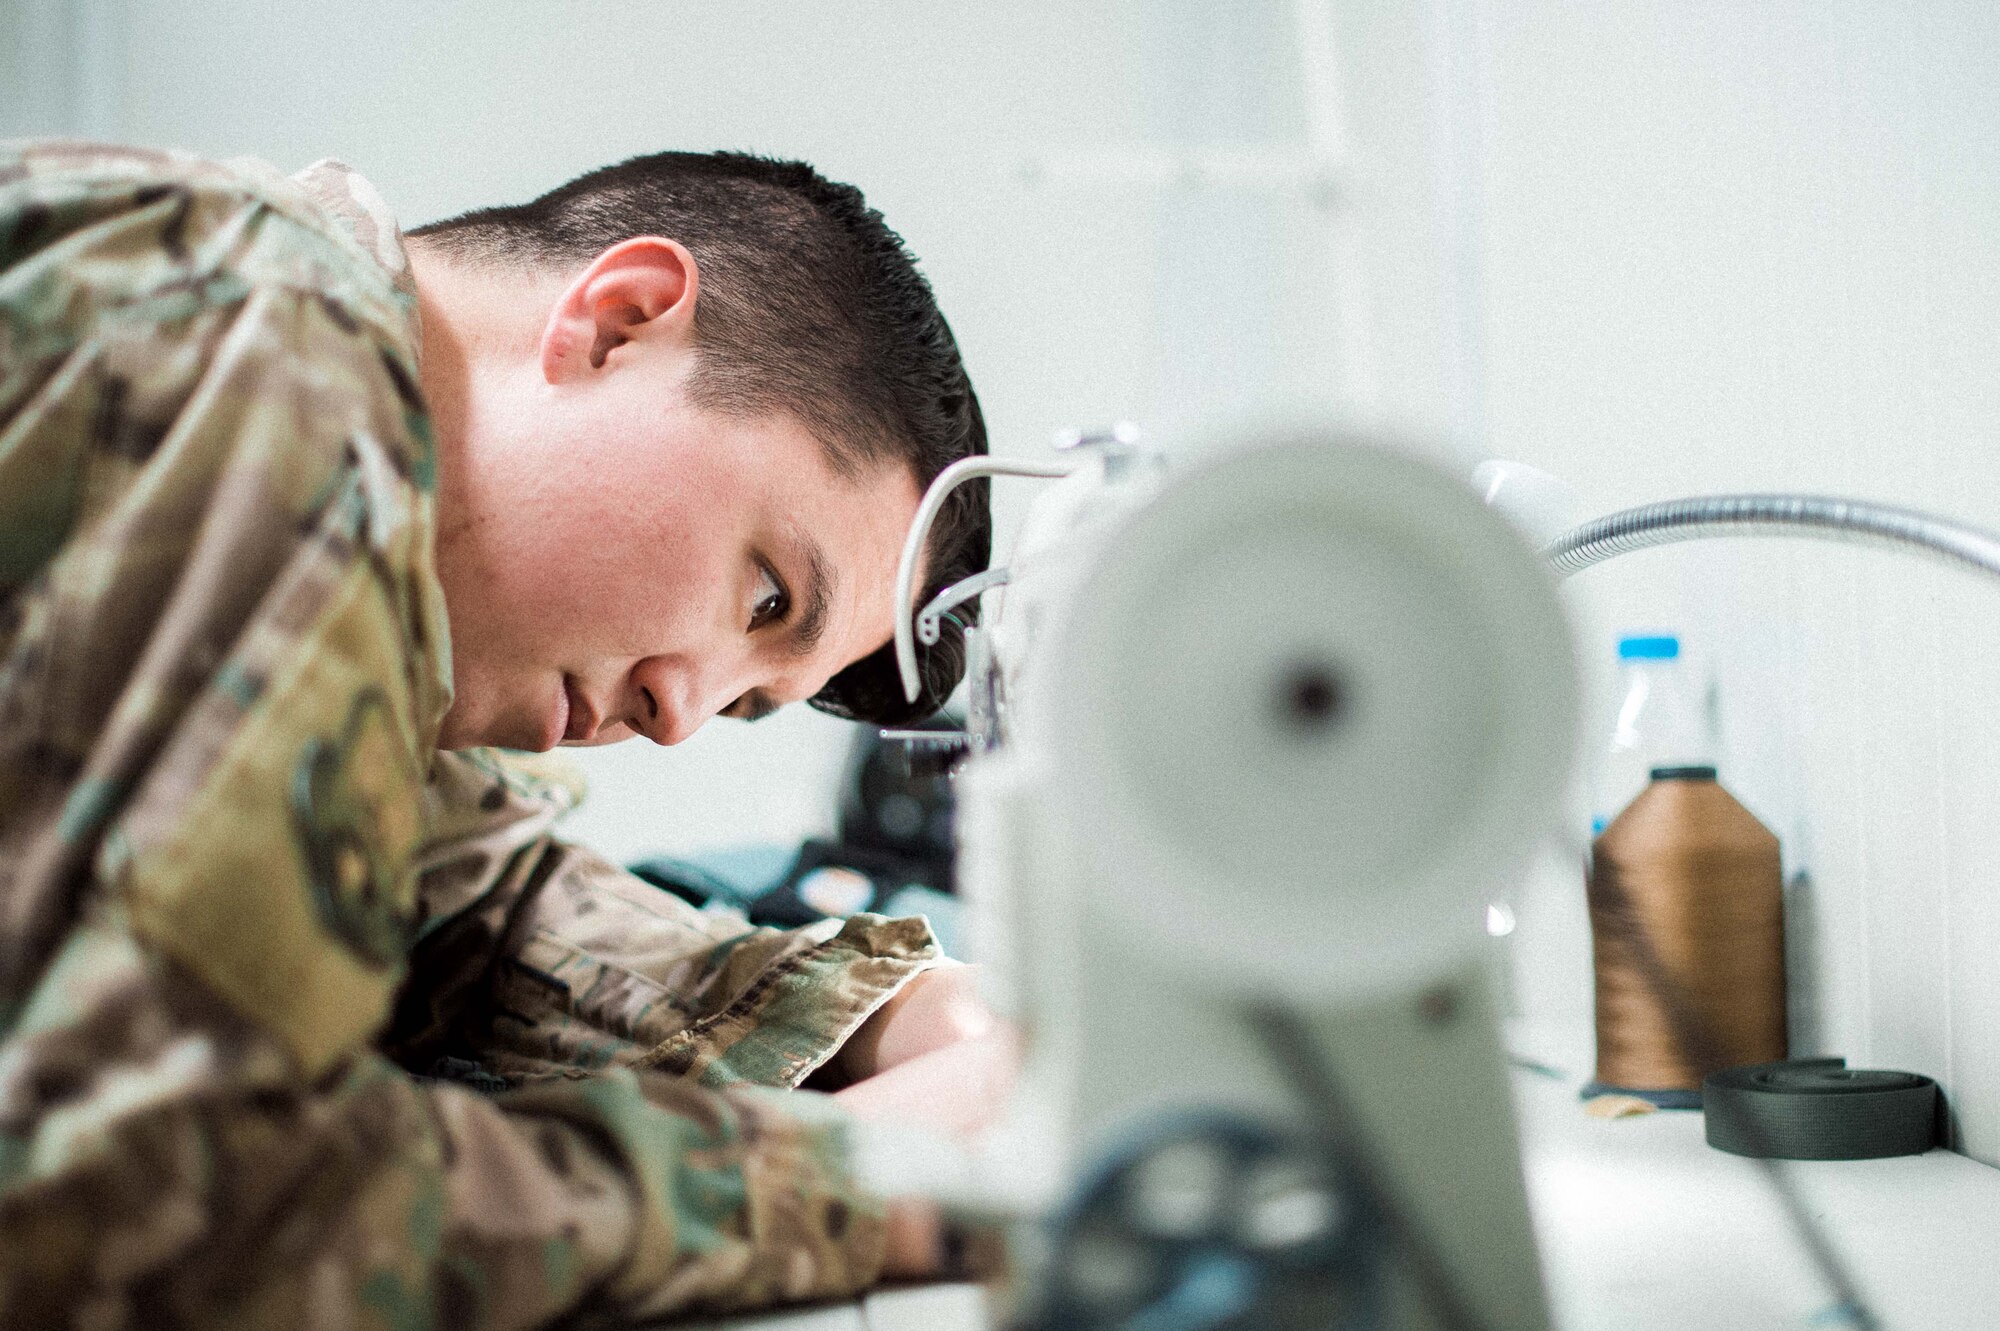 U.S. Air Force Staff Sgt. Andrew Yabumoto, 493rd EFS aircrew flight equipment apprentice, sews a harness February 14, 2019 in Southwest Asia. The AFE shop works around the clock to ensure aircrew members’ daily equipment, which includes G-suits, night vision goggles, harnesses, helmets and oxygen masks are ready to go at a moment’s notice. (U.S. Air Force photo by Staff Sgt. Delano)